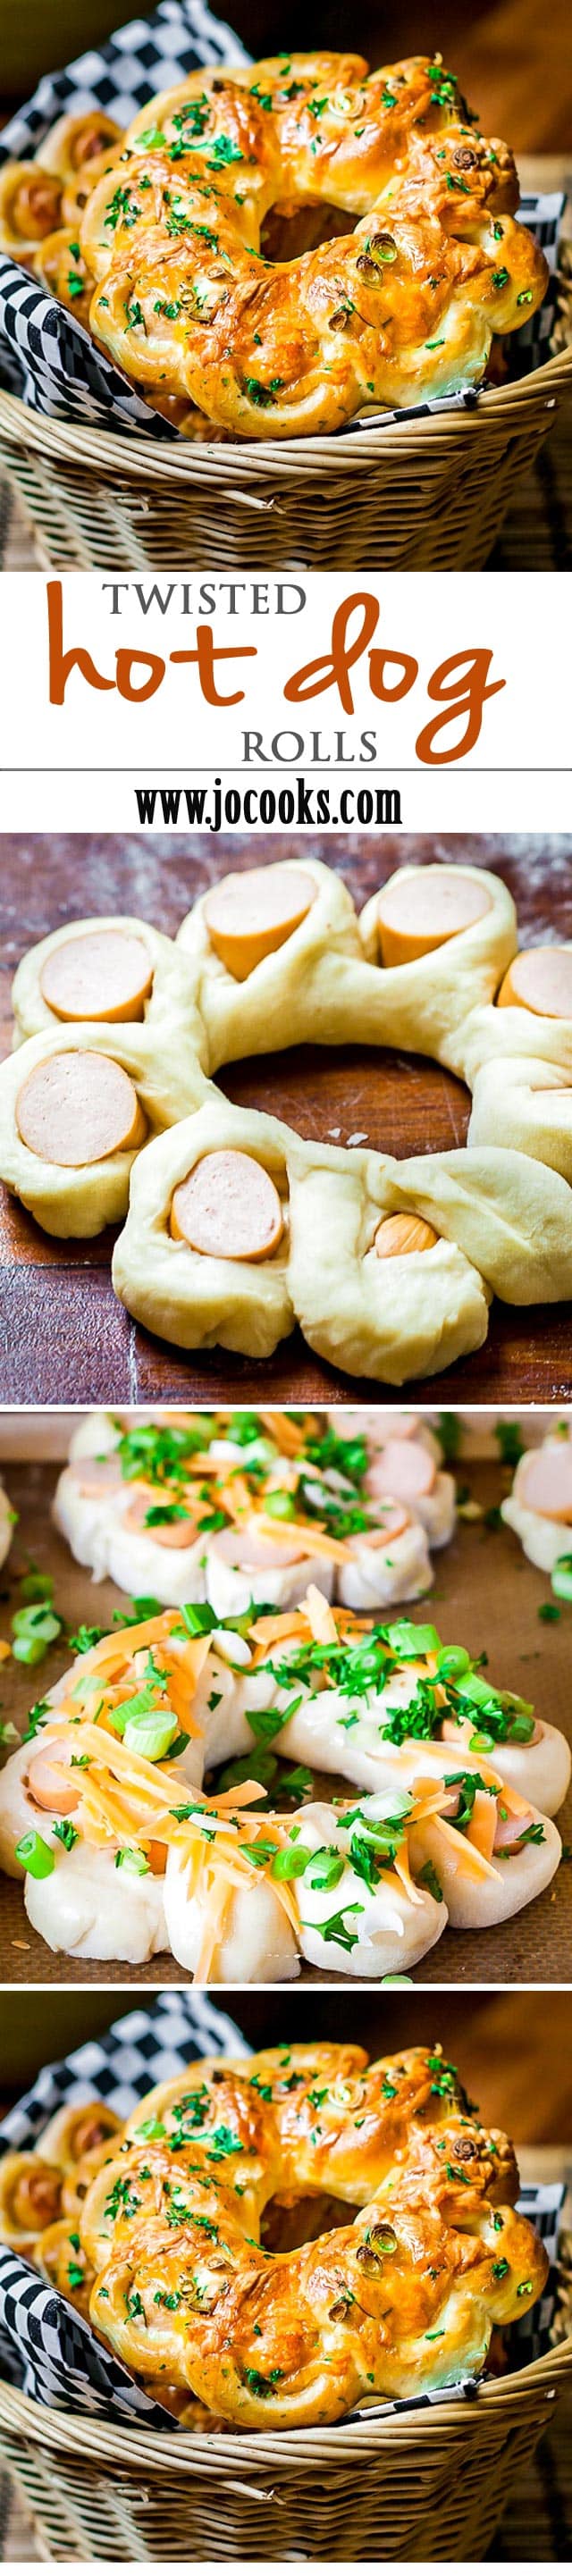 Twisted Hot Dog Rolls - a new spin on the traditional hot dog roll.